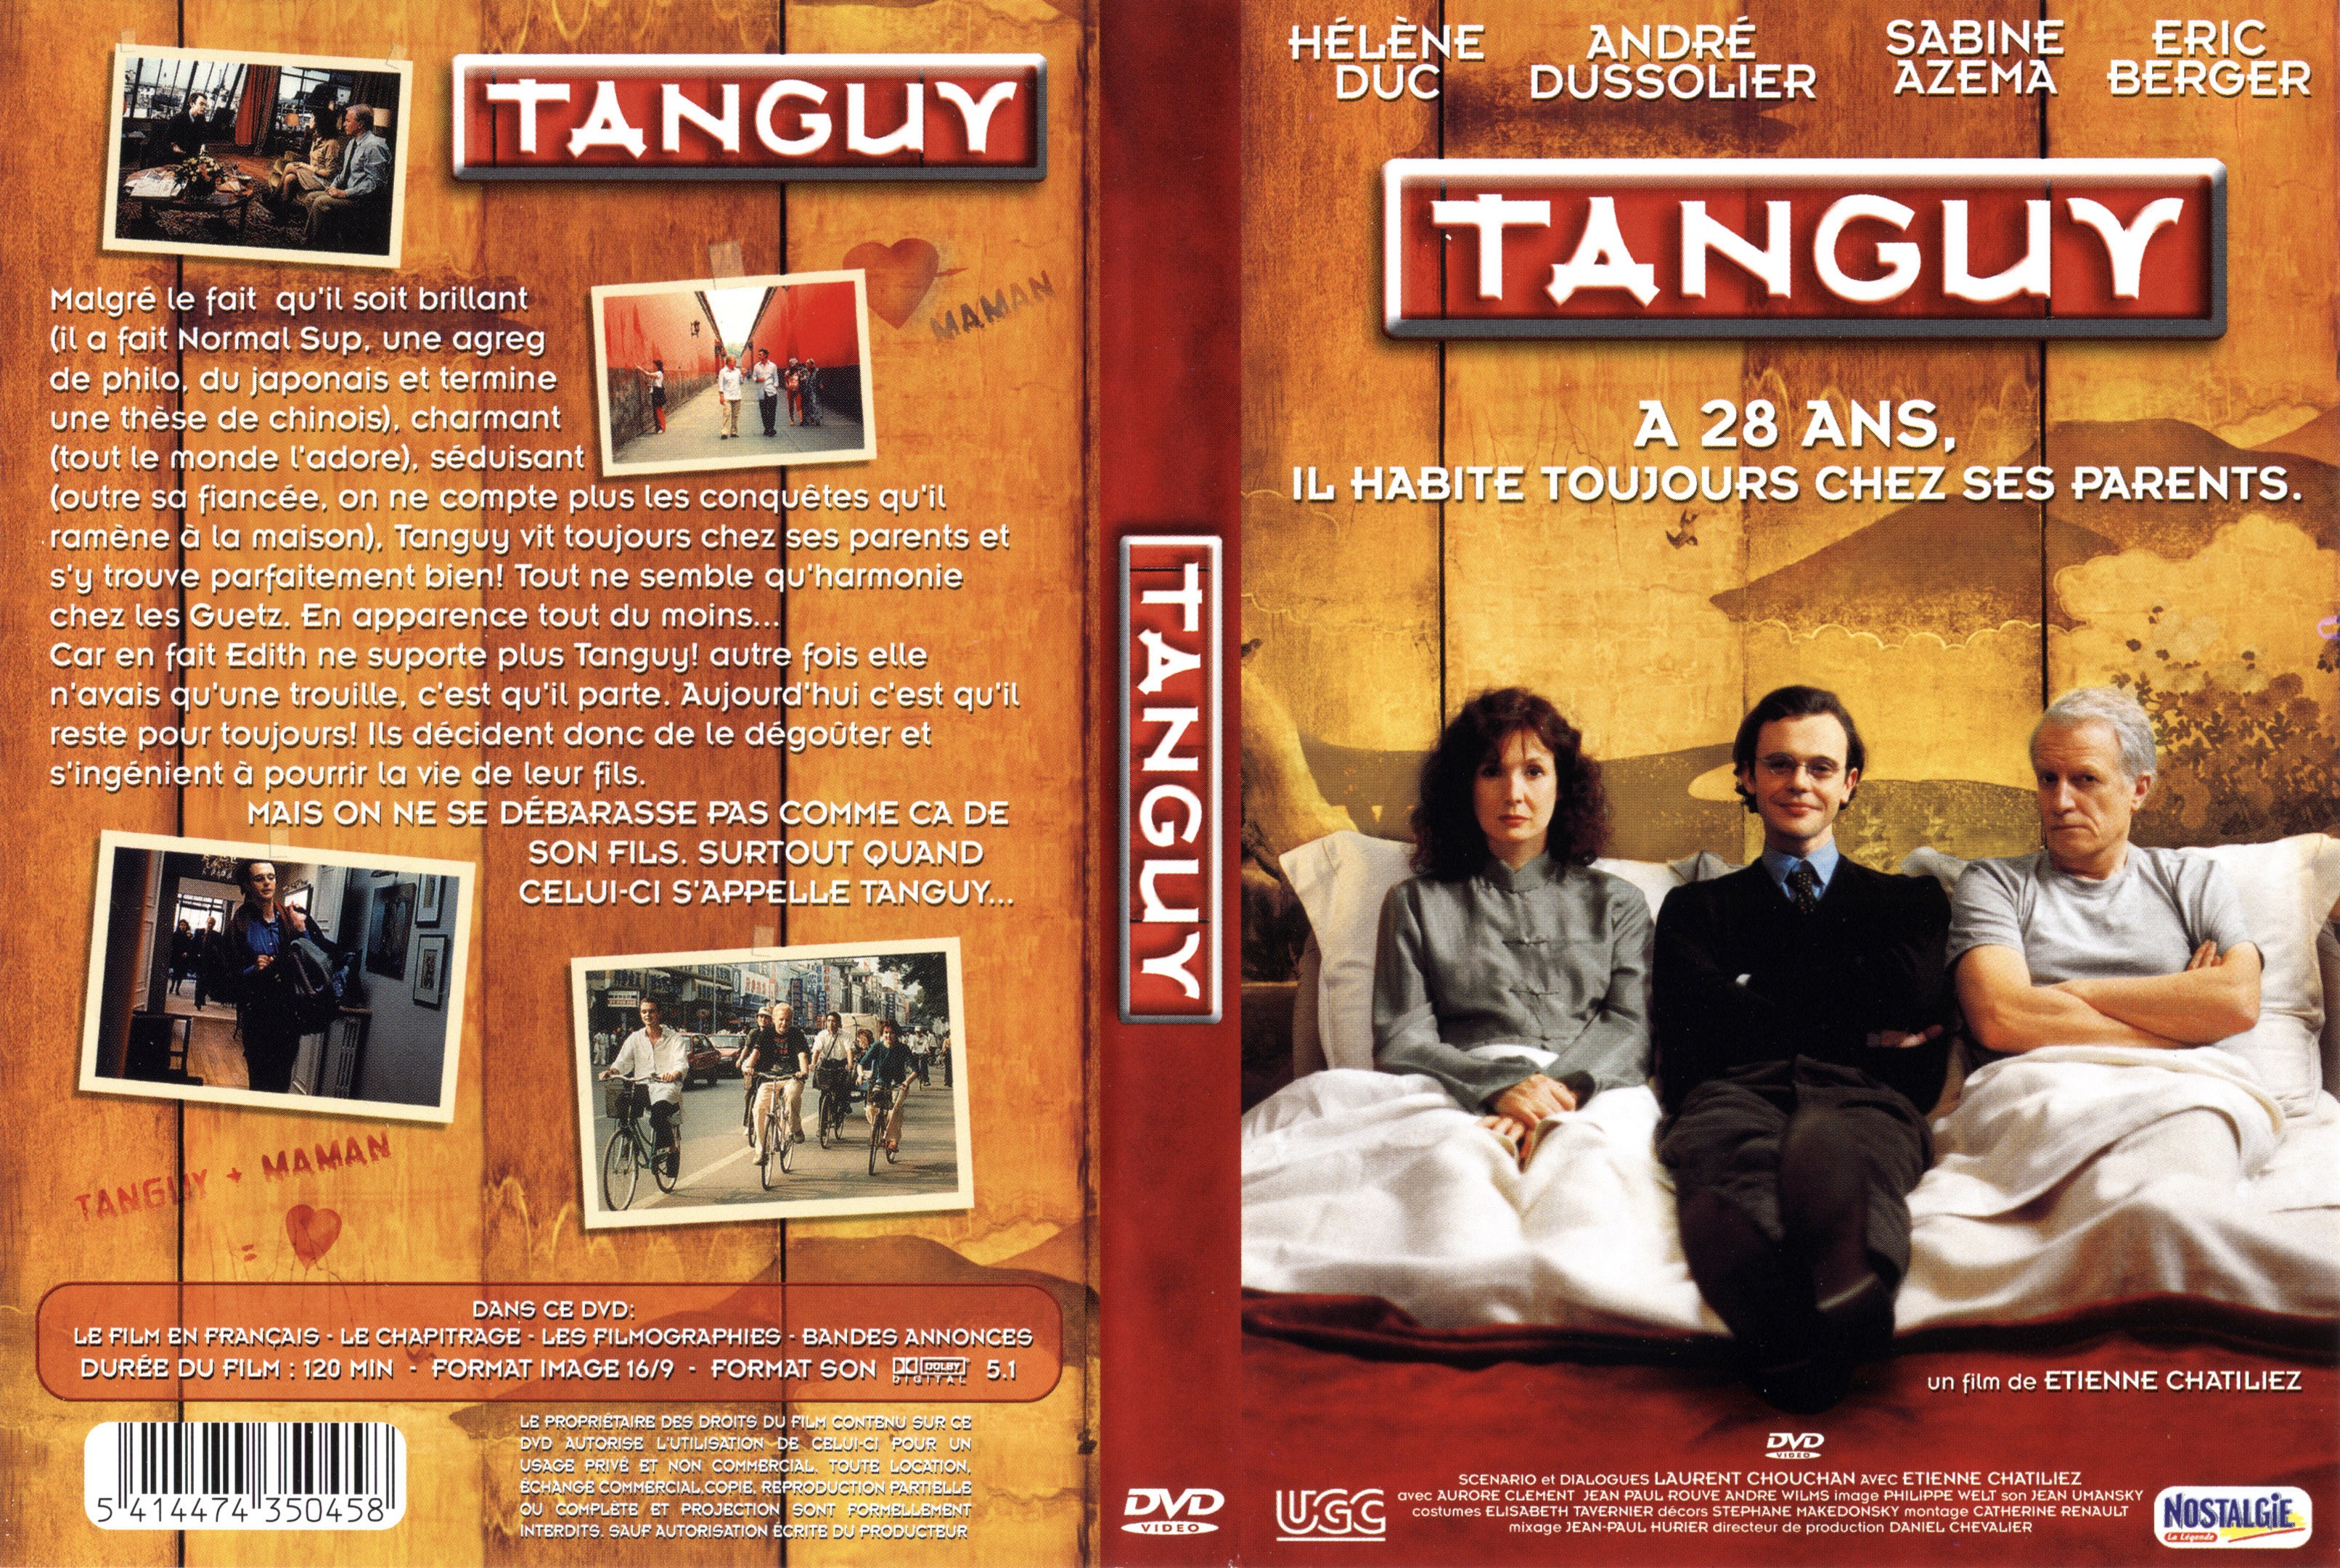 Jaquette DVD Tanguy